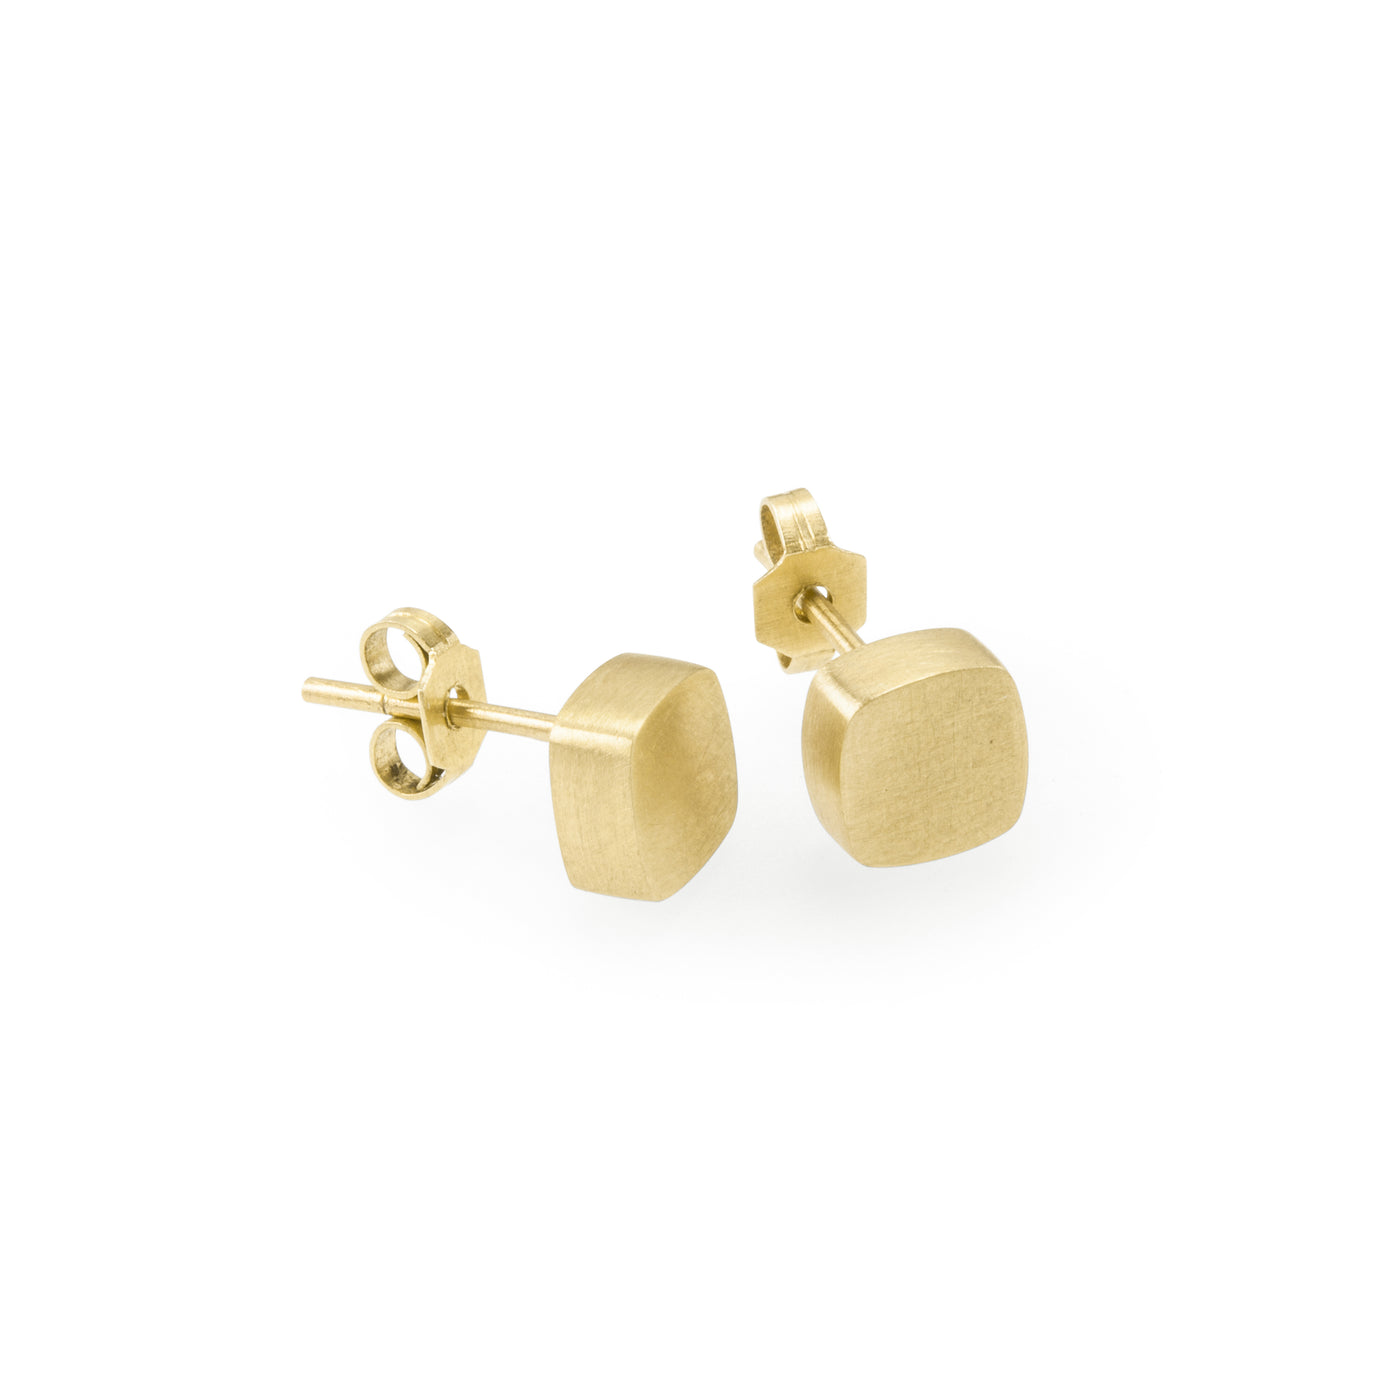 Eco-friendly gold earrings. These sustainable Form Studs are handmade in Cape Town in recycled gold from e-waste.